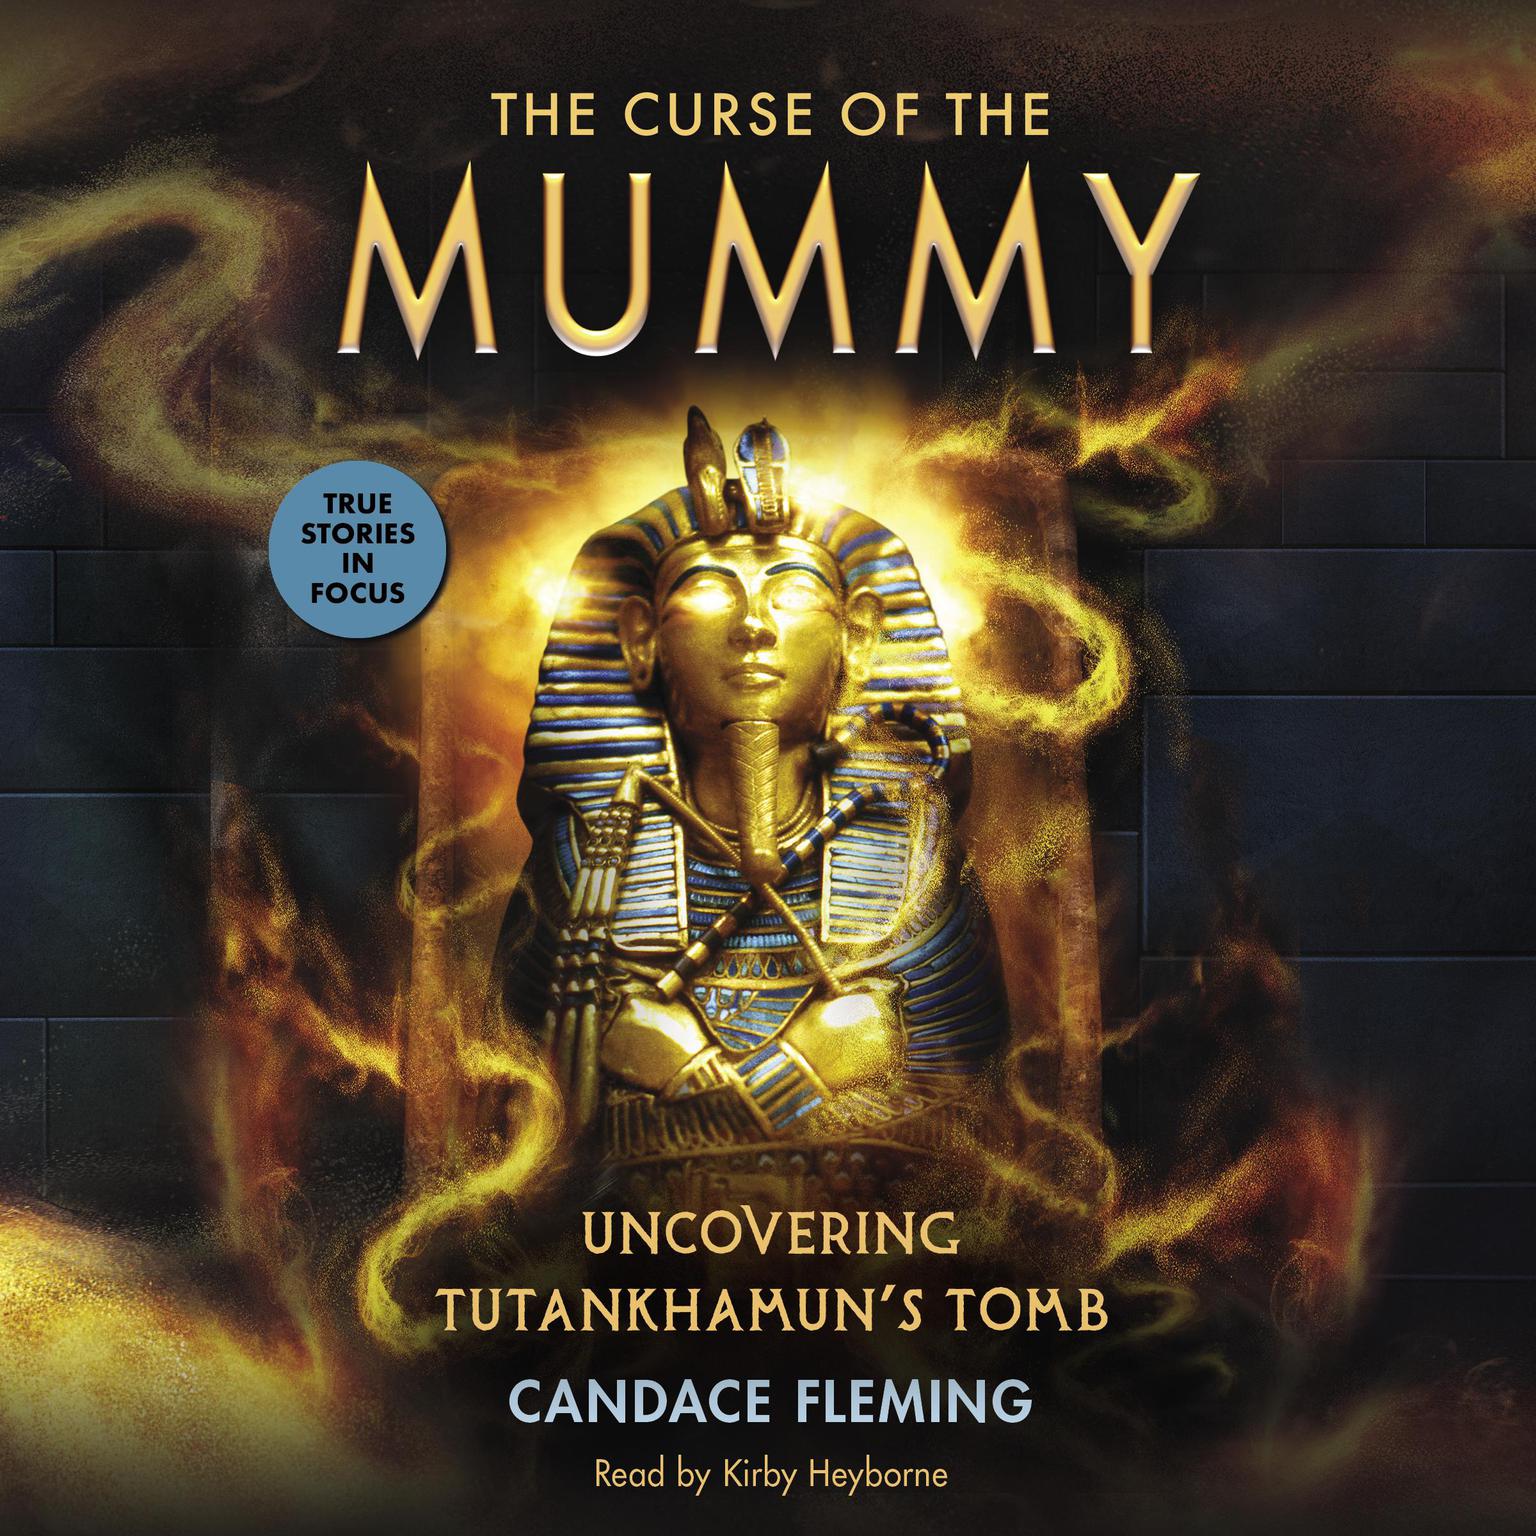 The Curse of the Mummy: Uncovering Tutankhamuns Tomb (Scholastic Focus): Uncovering Tutankhamuns Tomb Audiobook, by Candace Fleming